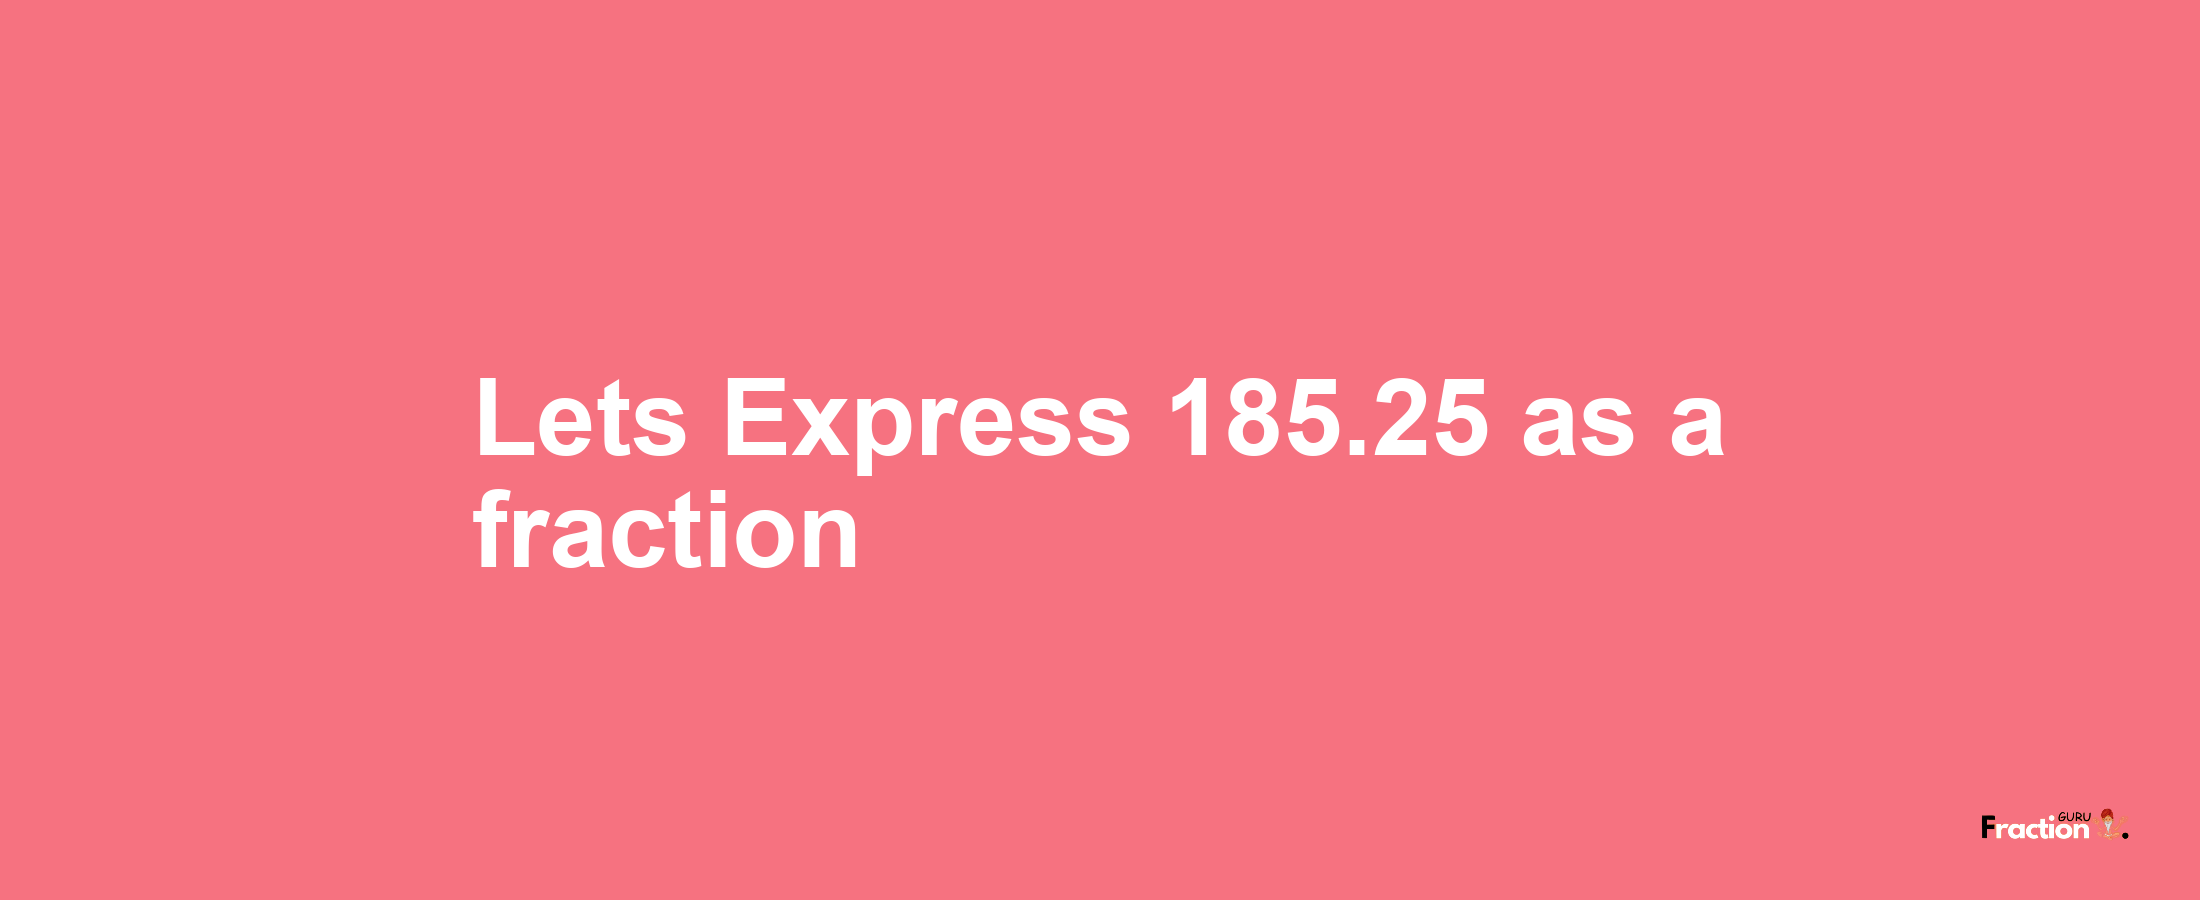 Lets Express 185.25 as afraction